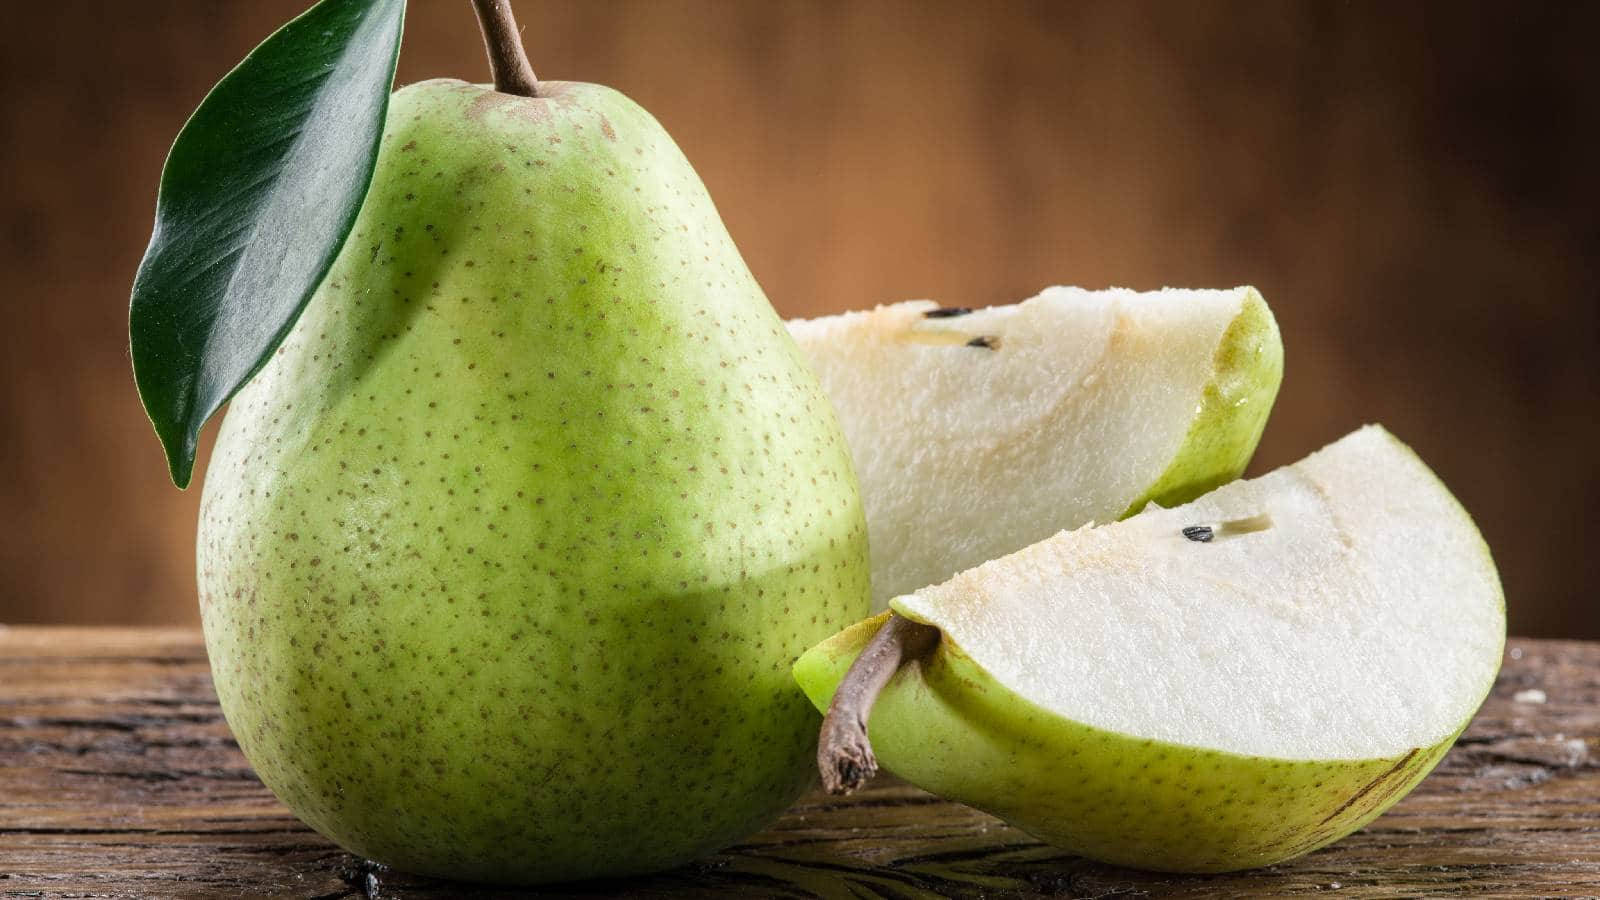 Pear Fruit Two Slices Wallpaper